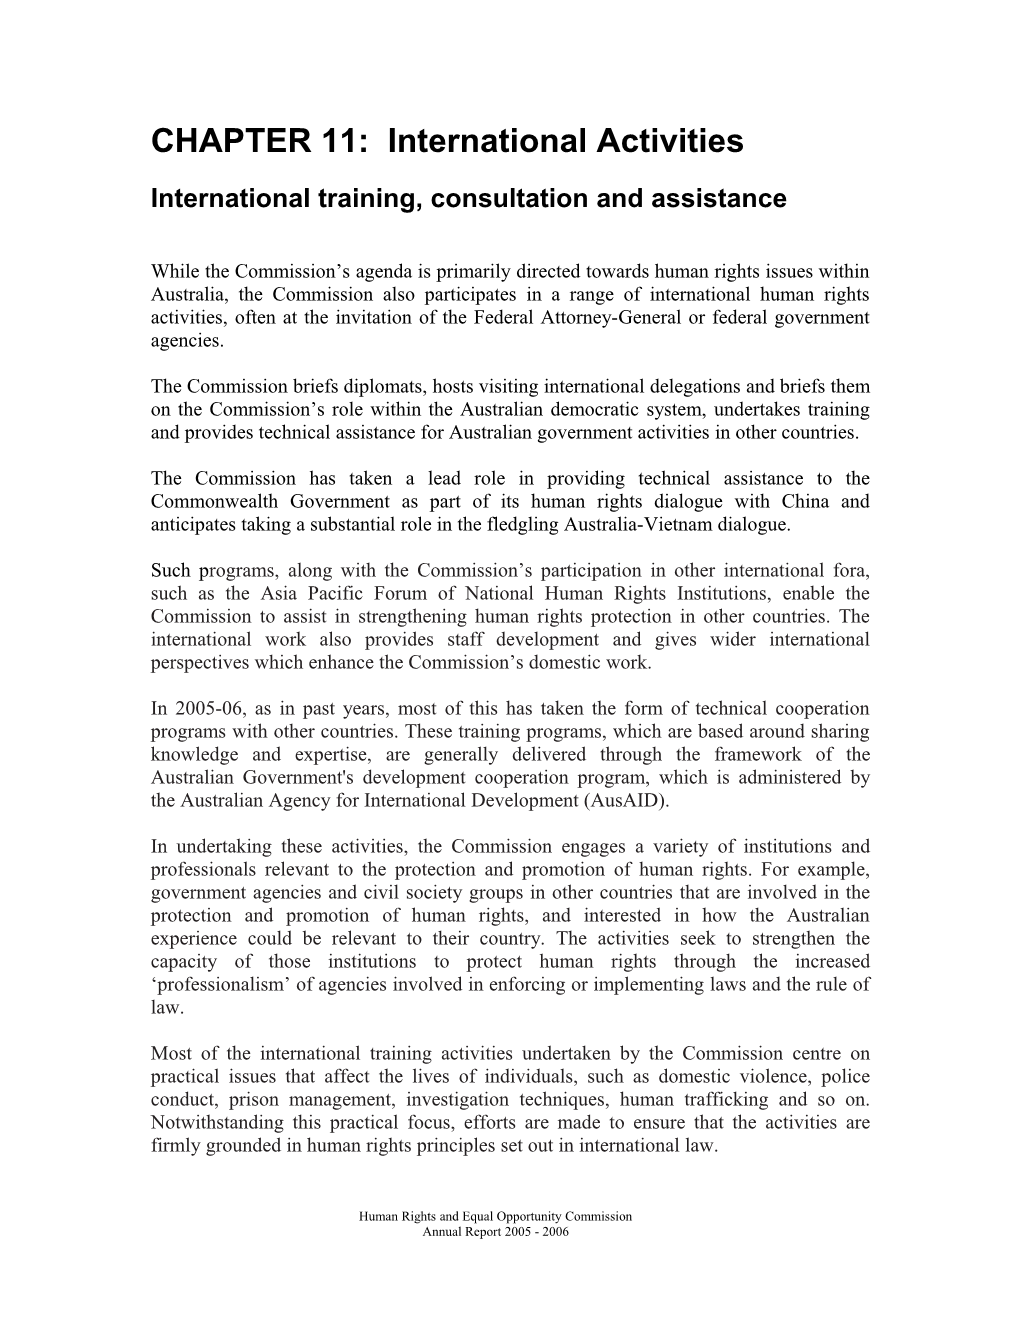 International Training, Consultations and Assistance